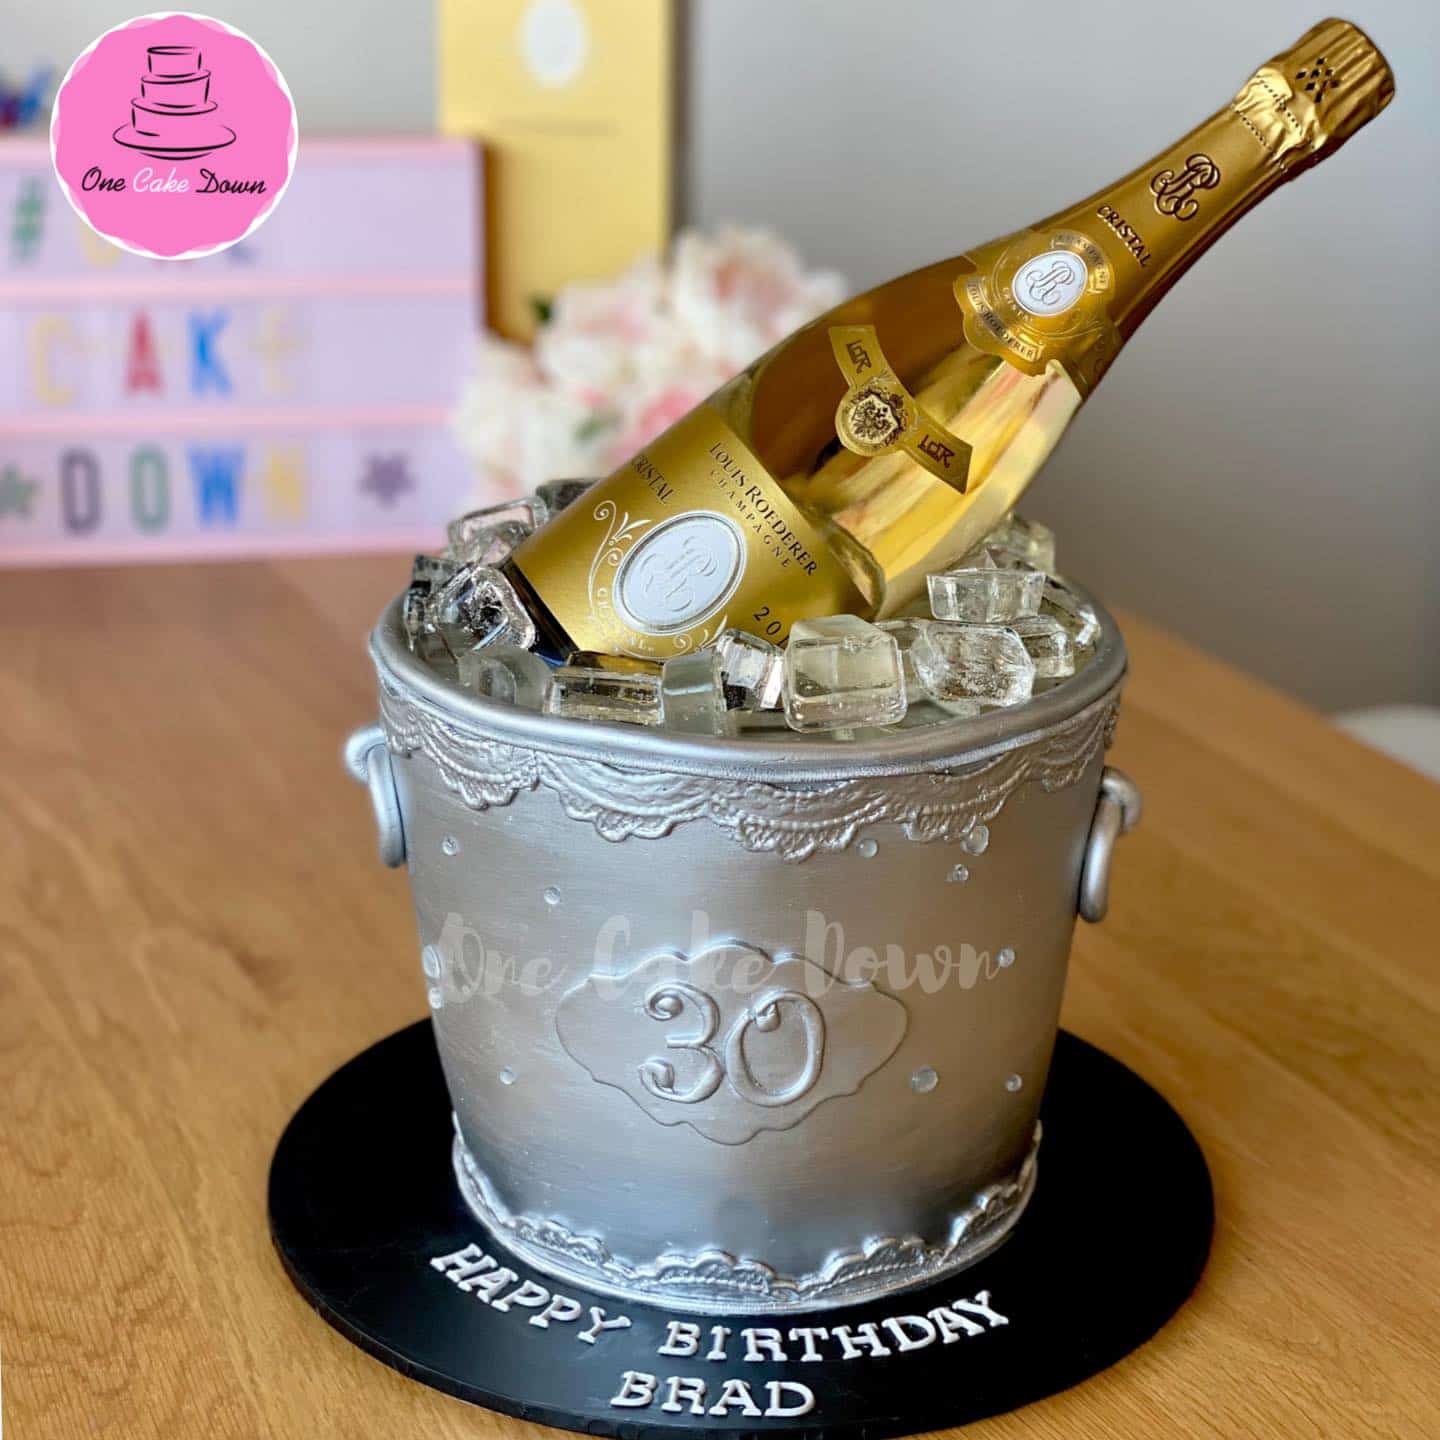 Alcohol Birthday Cake Ideas Images (Pictures) | Beer cake, Birthday cake  for him, Alcohol birthday cake